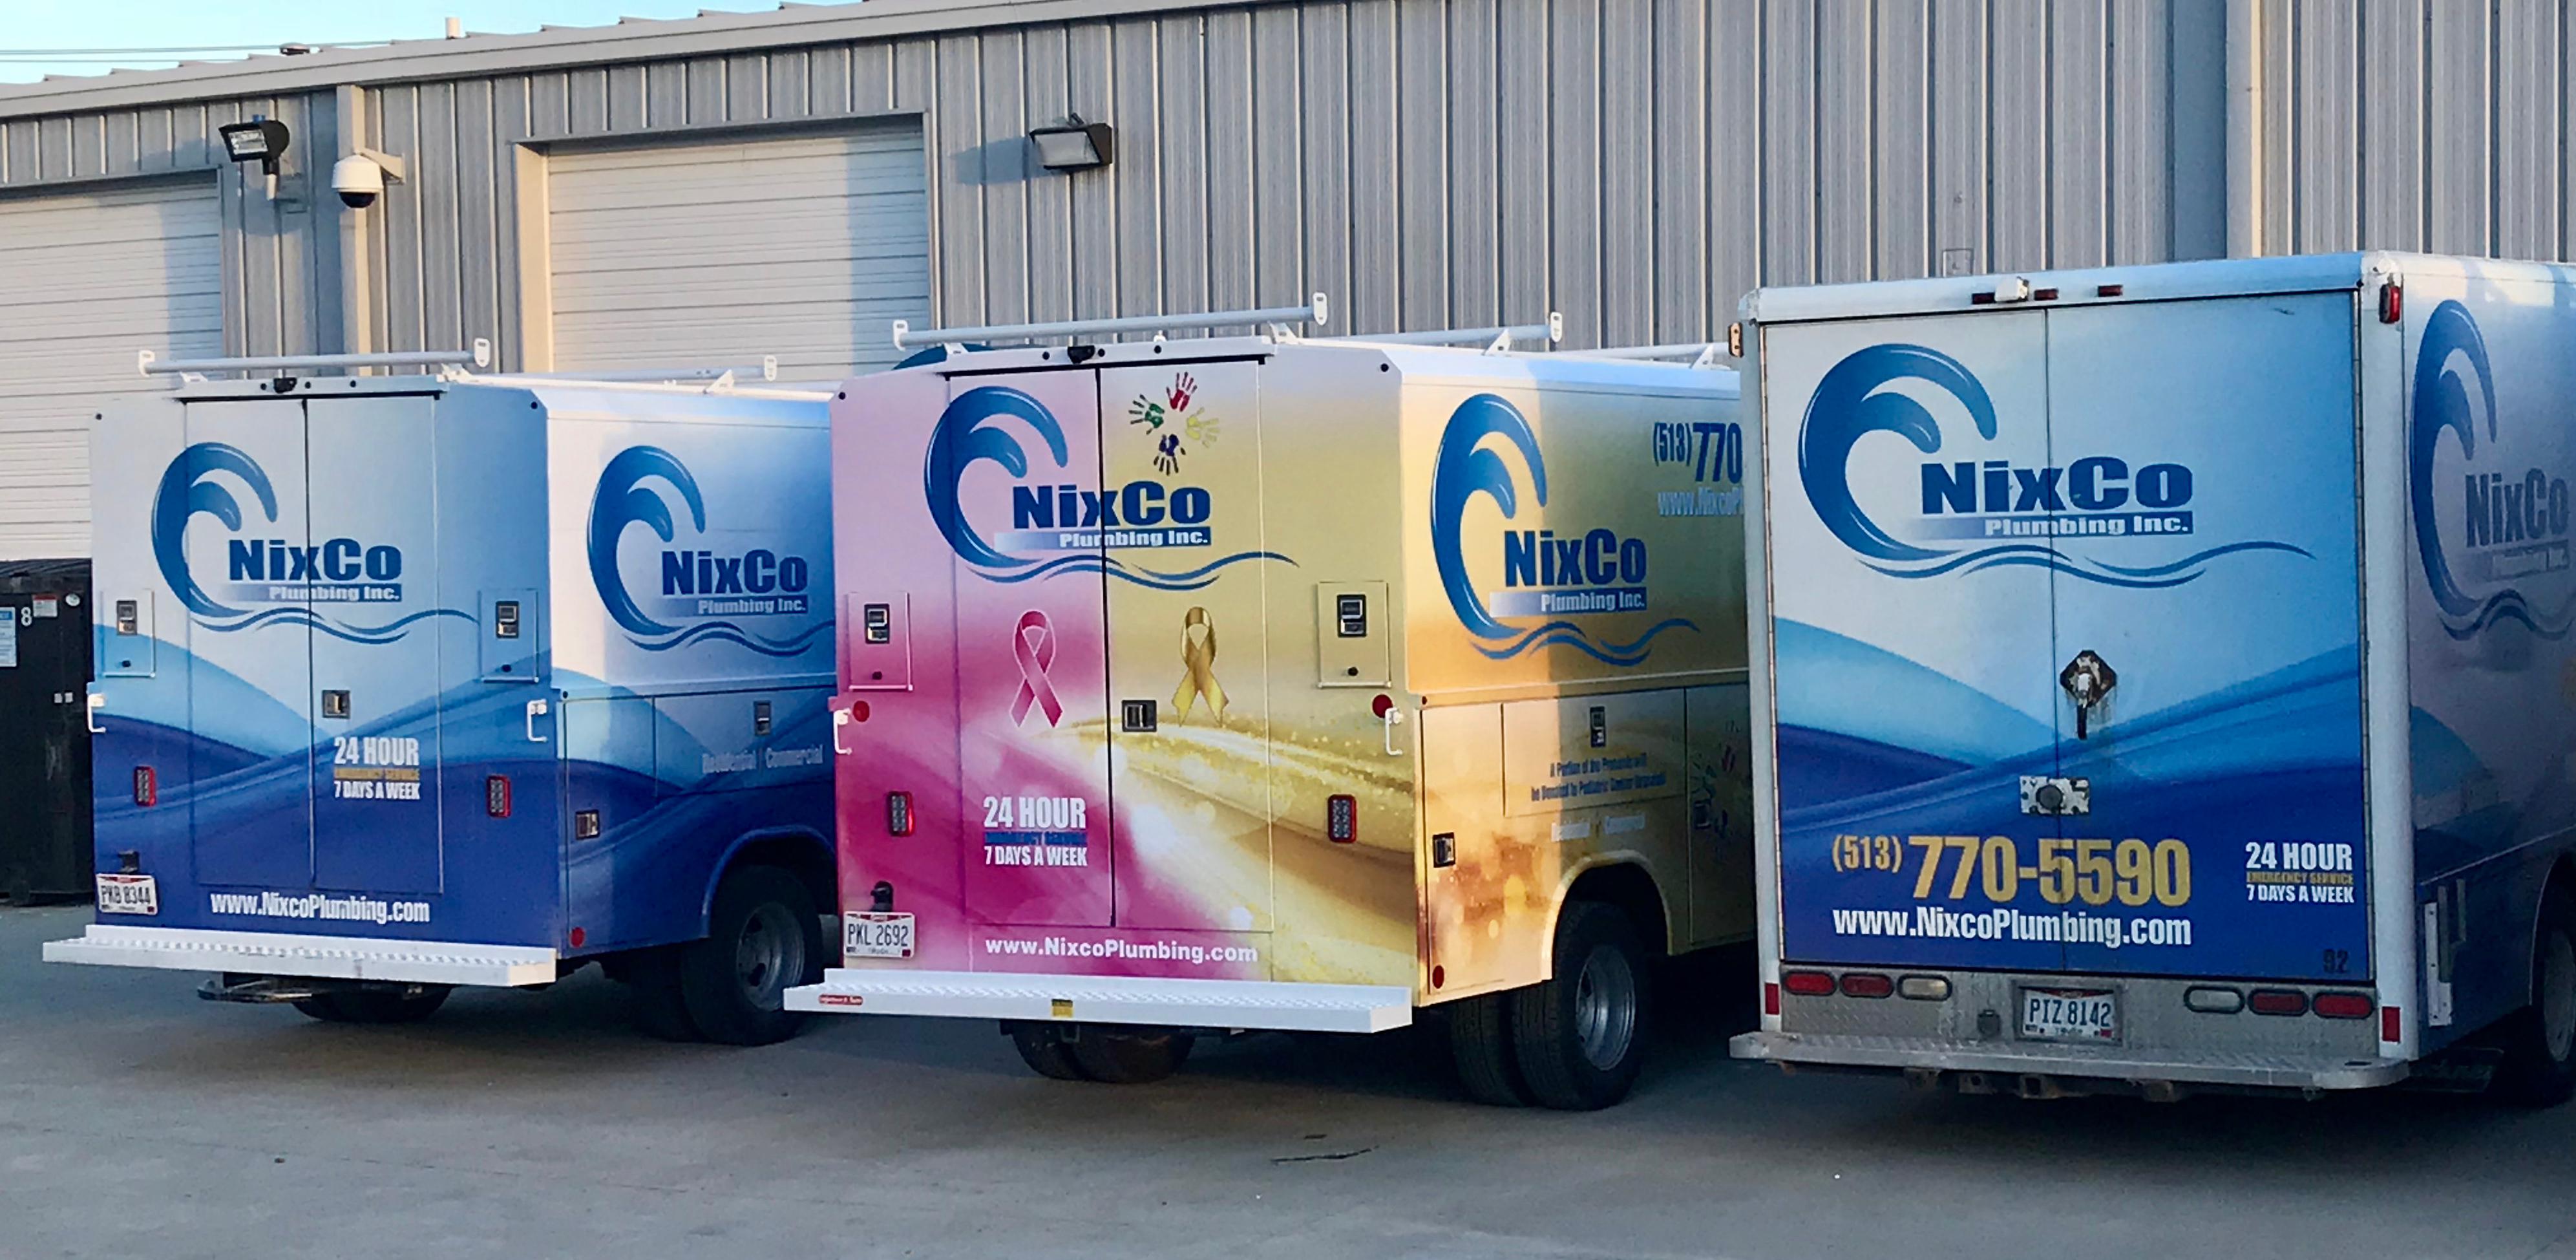 Water Line Services in West Chester Township, OH - Nixco Plumbing